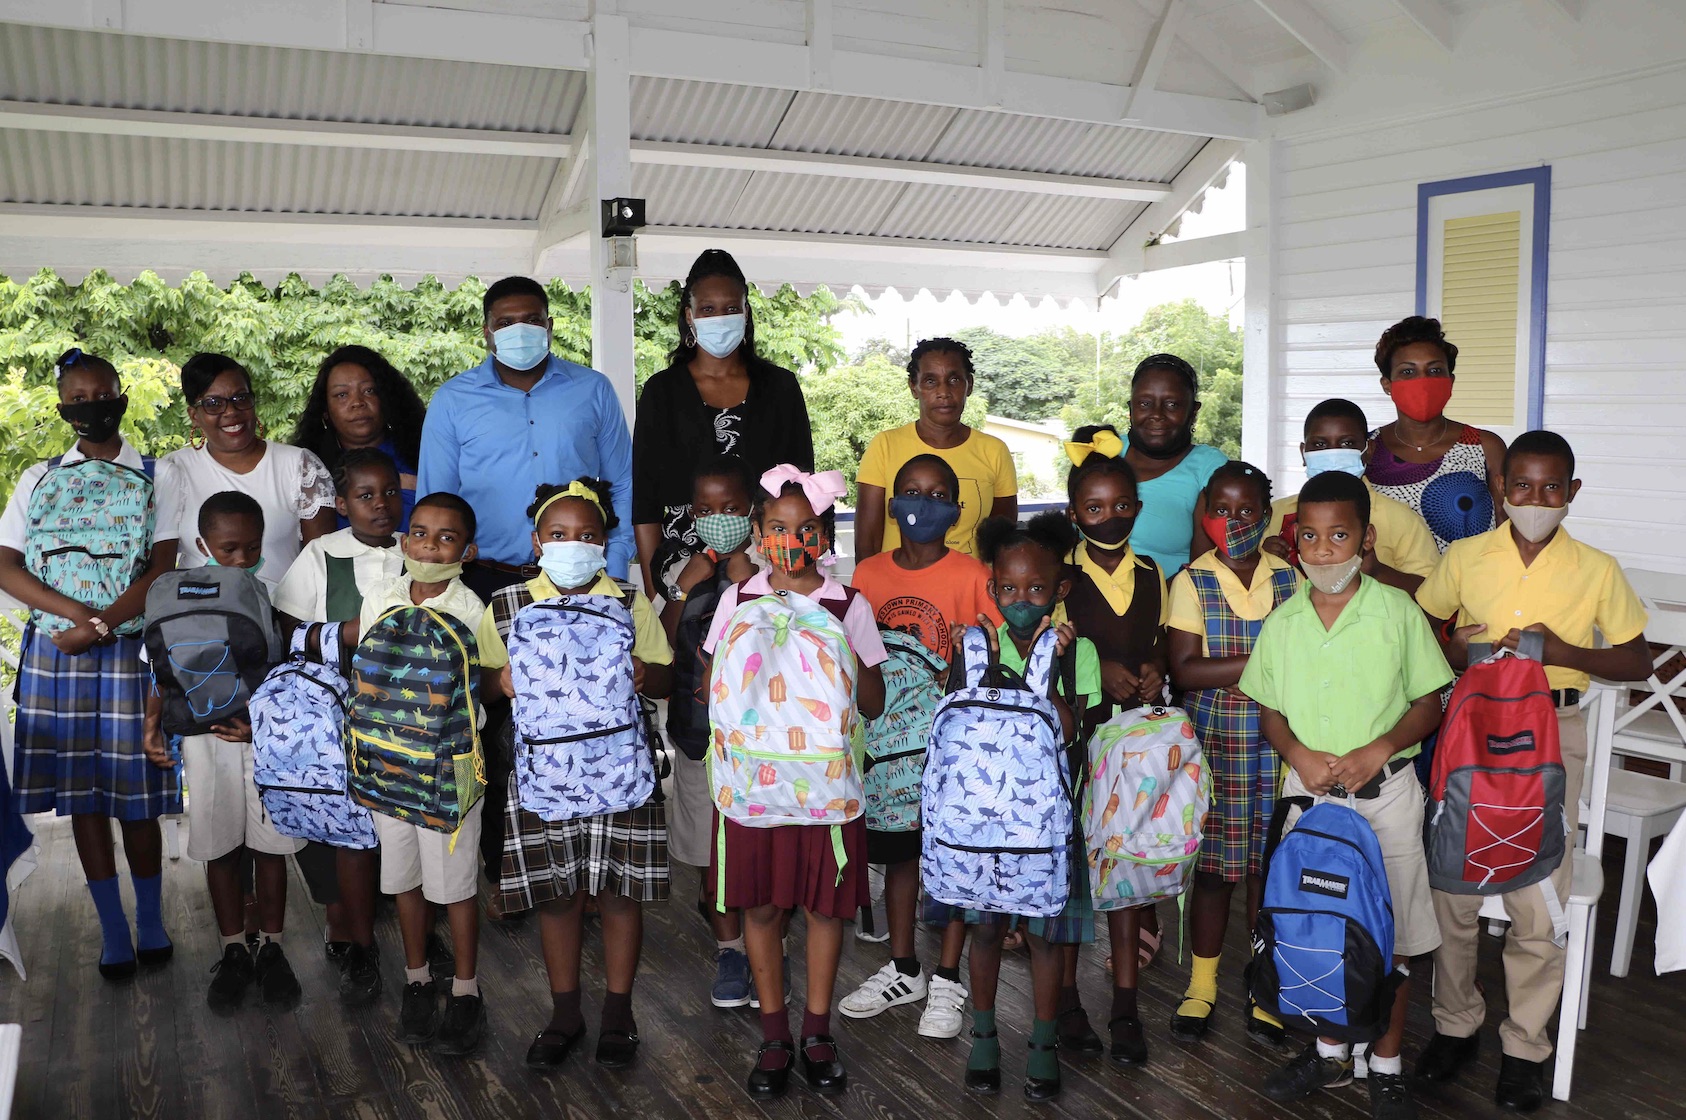 Members of the CCM Women’s Arm with Hon. Troy Liburd, Junior Minister of Education in the Nevis Island Administration, with recipients of school supplies donated by the CCM Women’s Arm on November 11, 2020